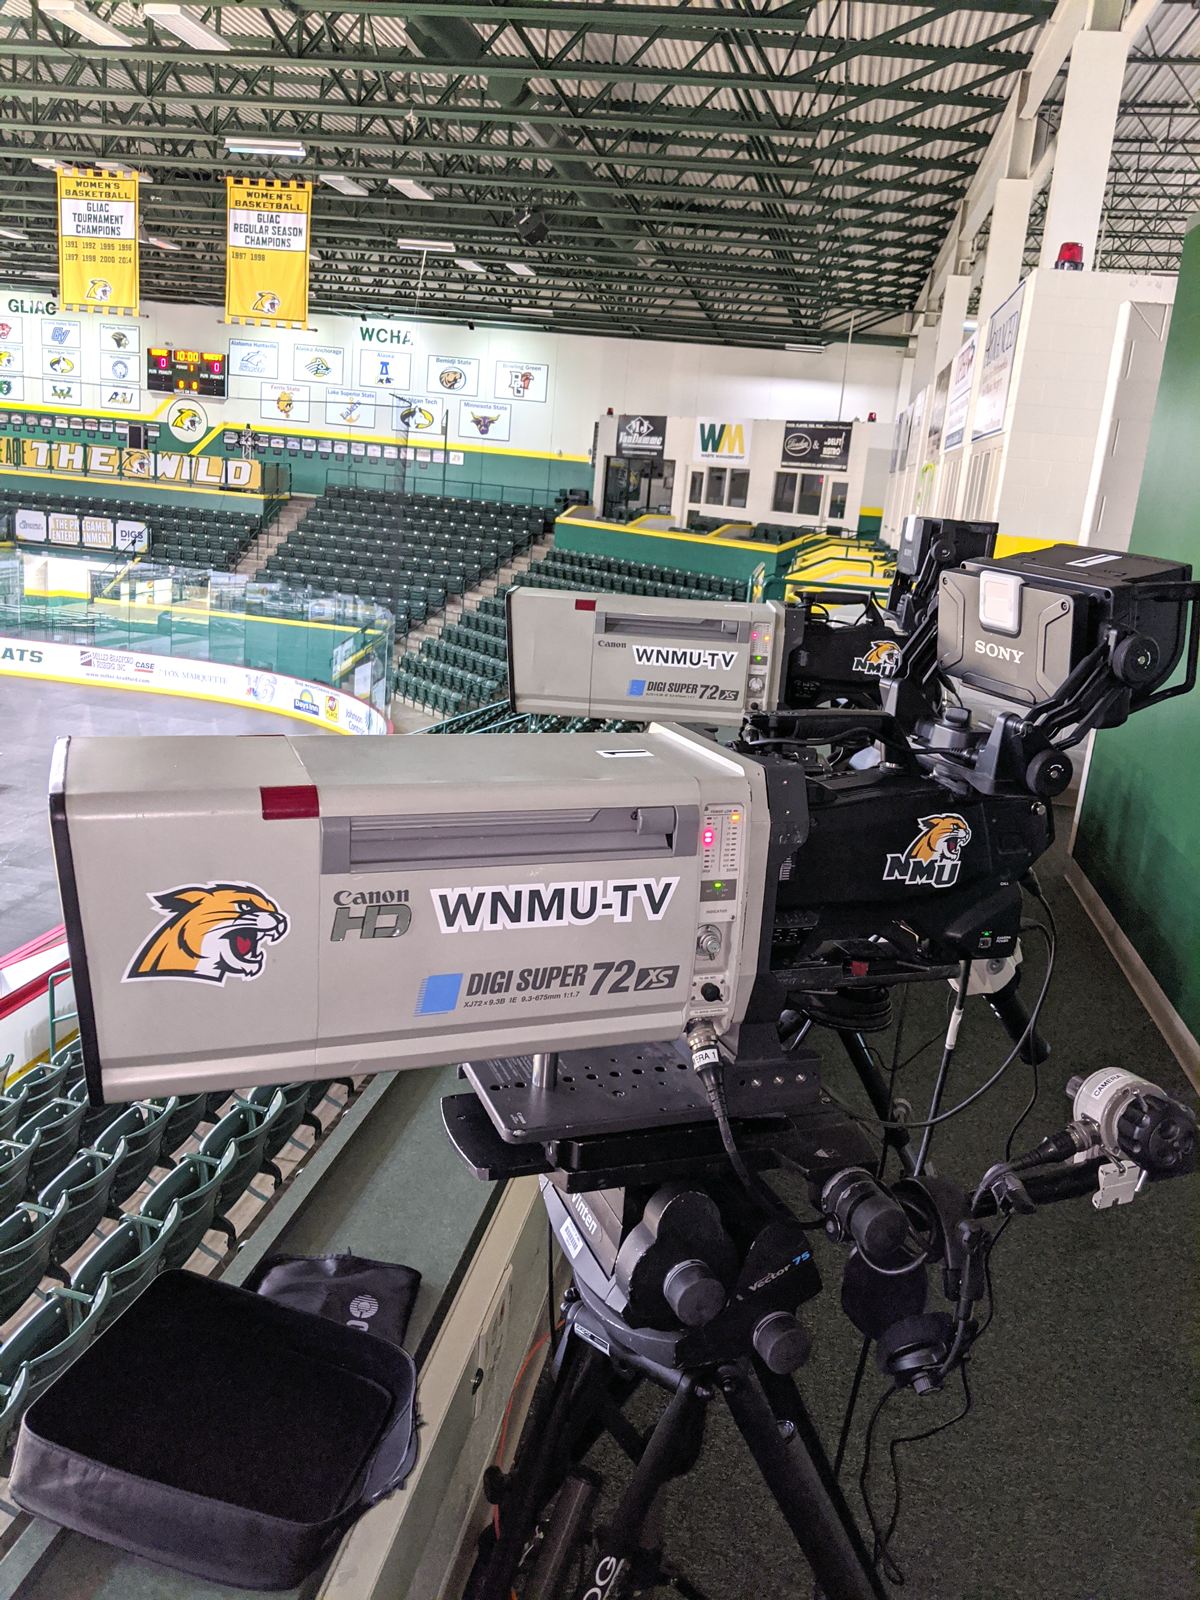 New WNMU-TV cameras at the Barry Events Center